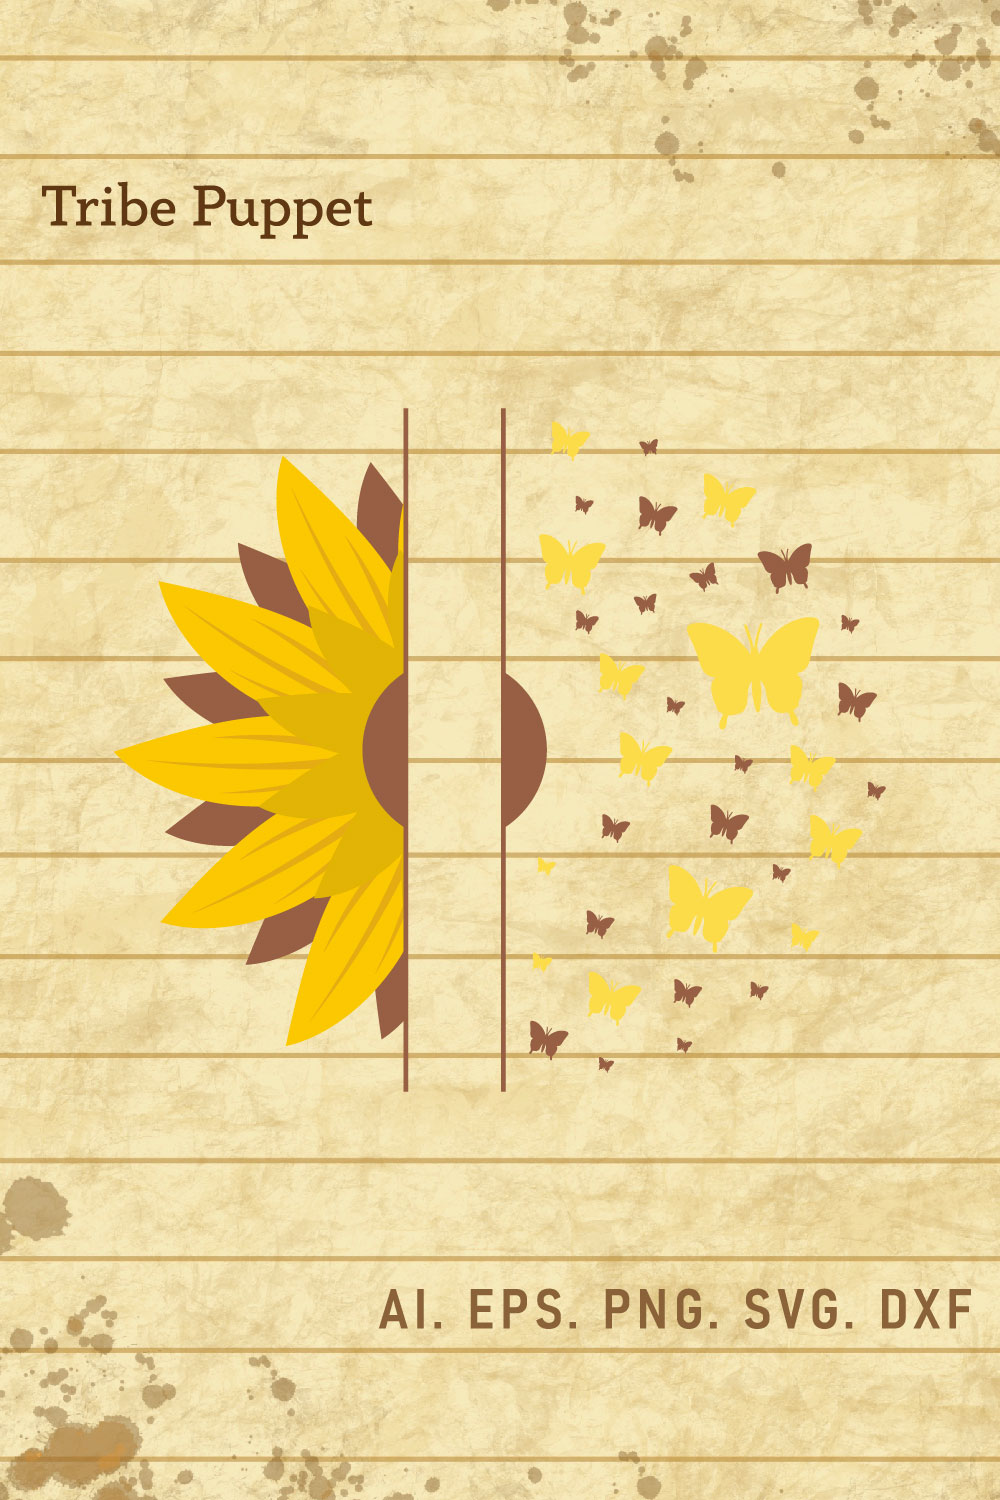 Sunflower 37 pinterest preview image.